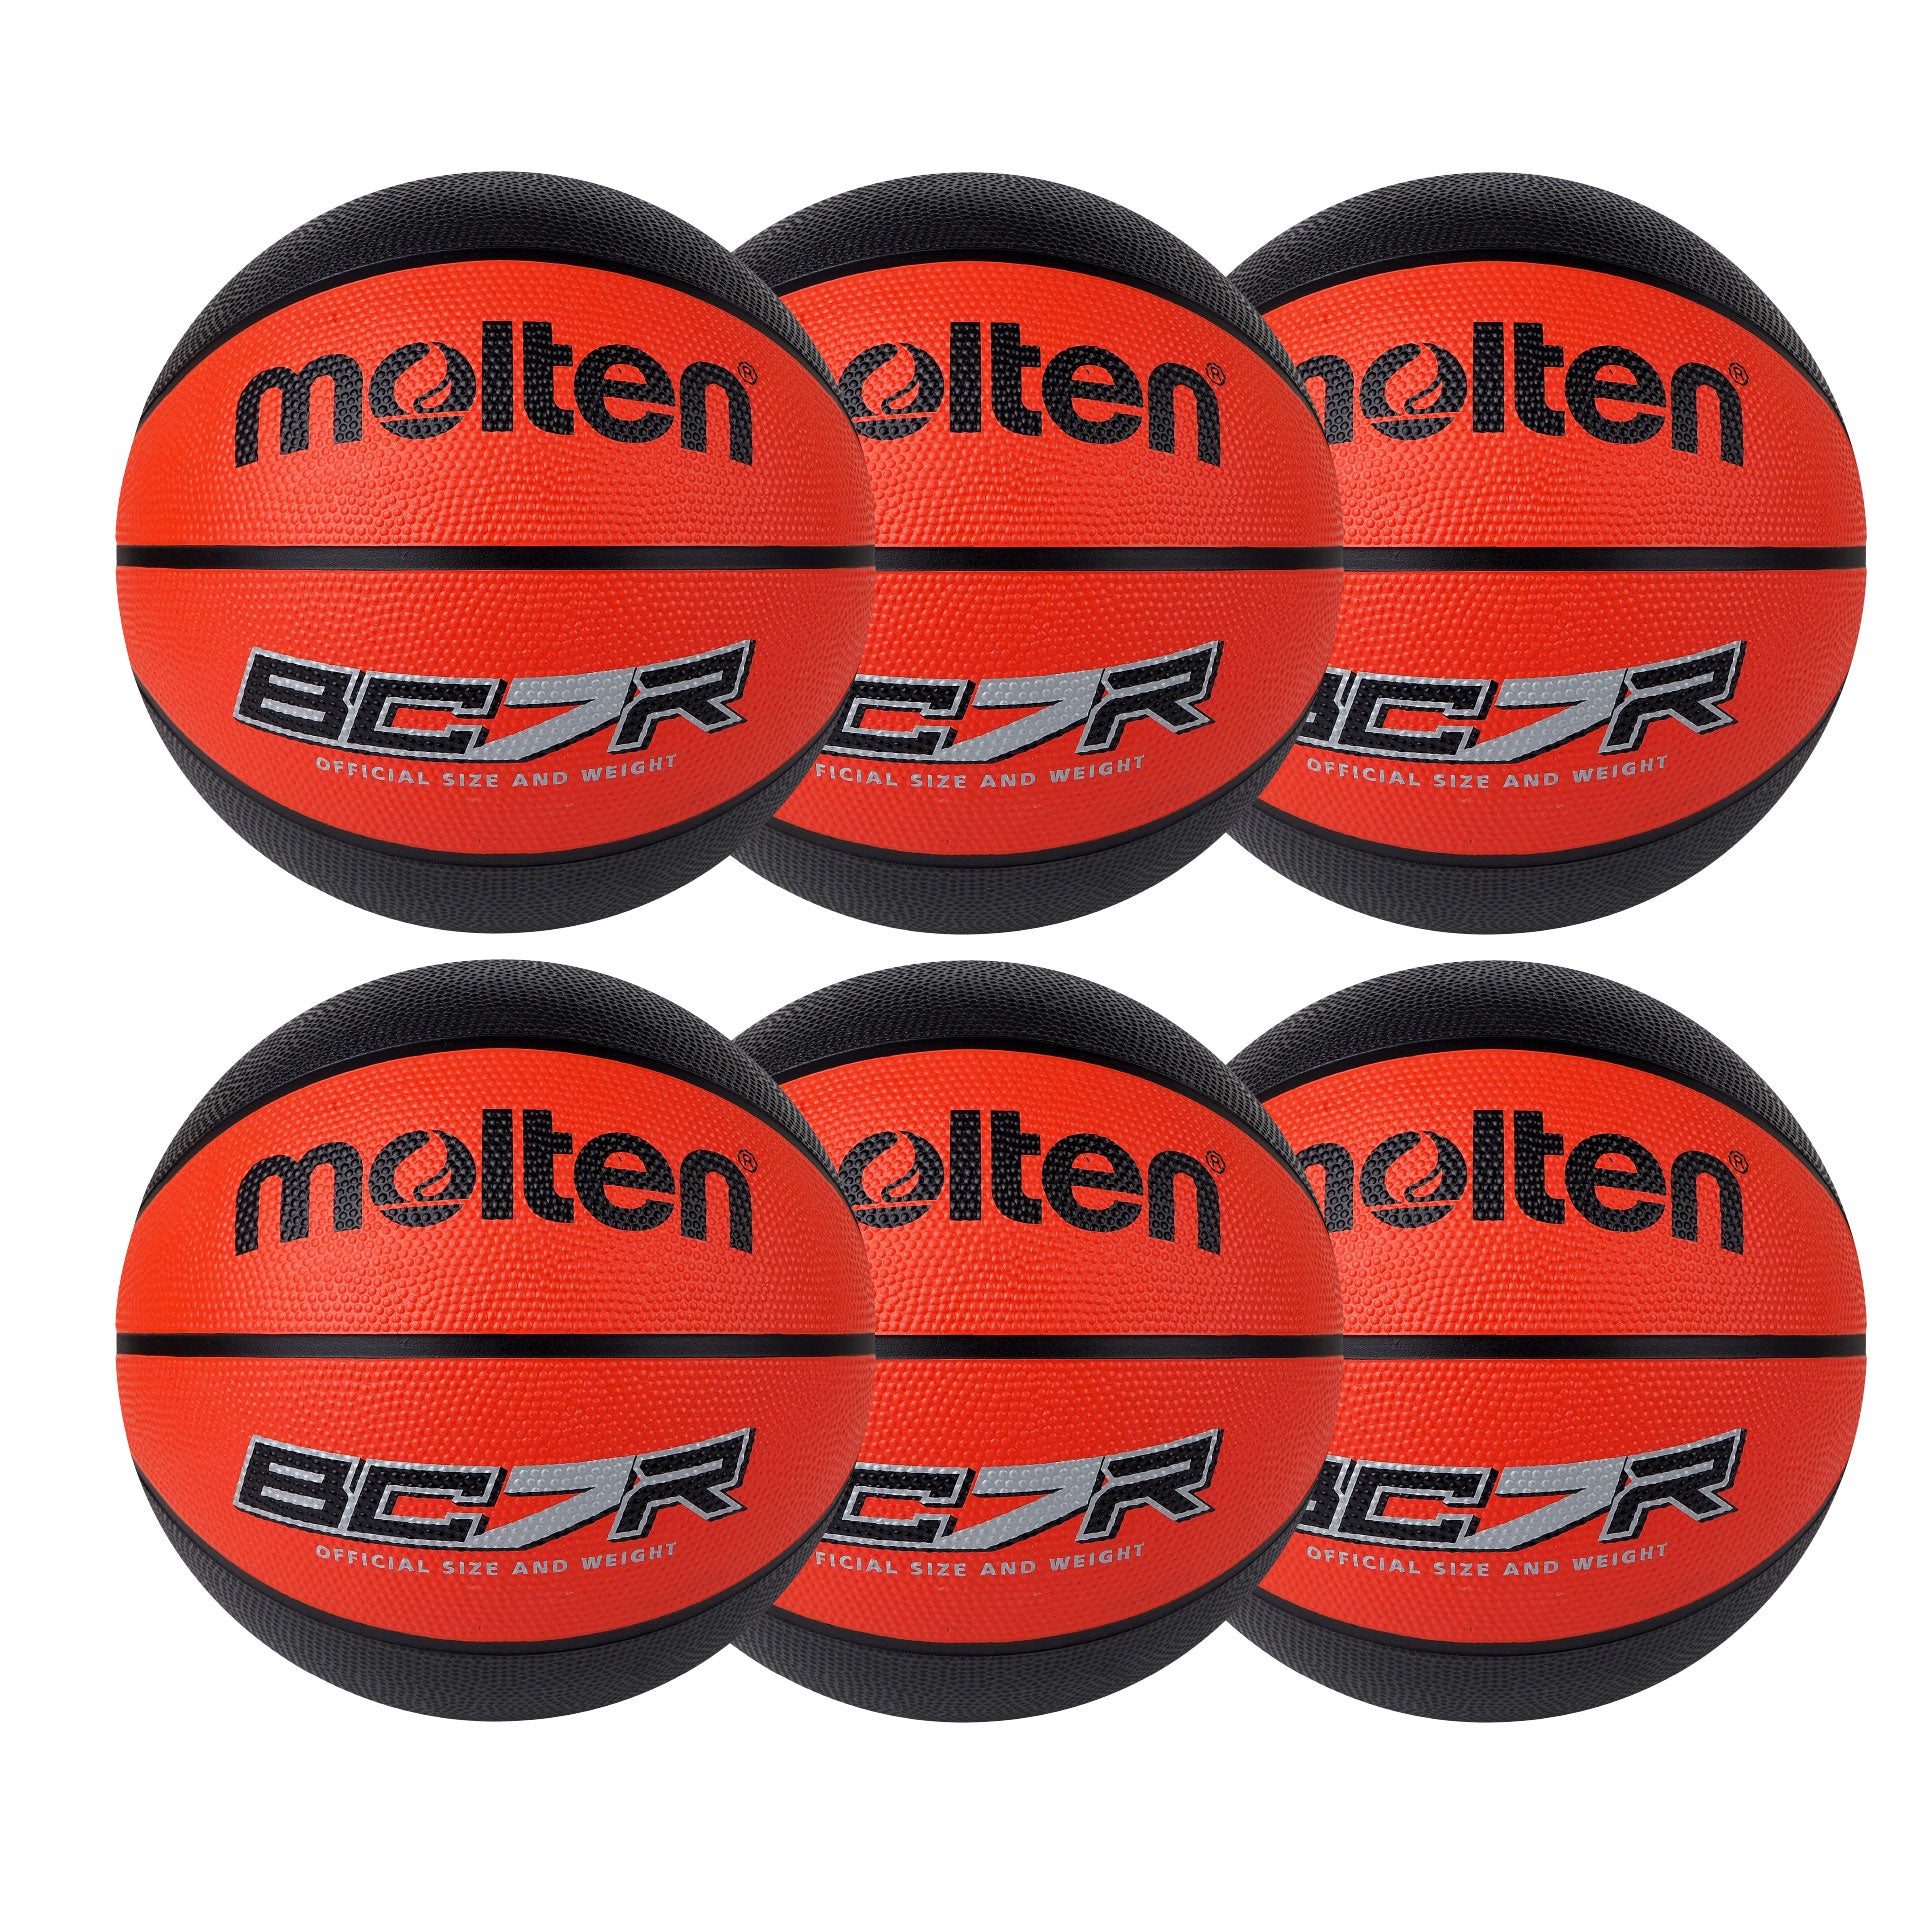 BCR2 Series Basketball - Black/Red - 6 Ball Pack